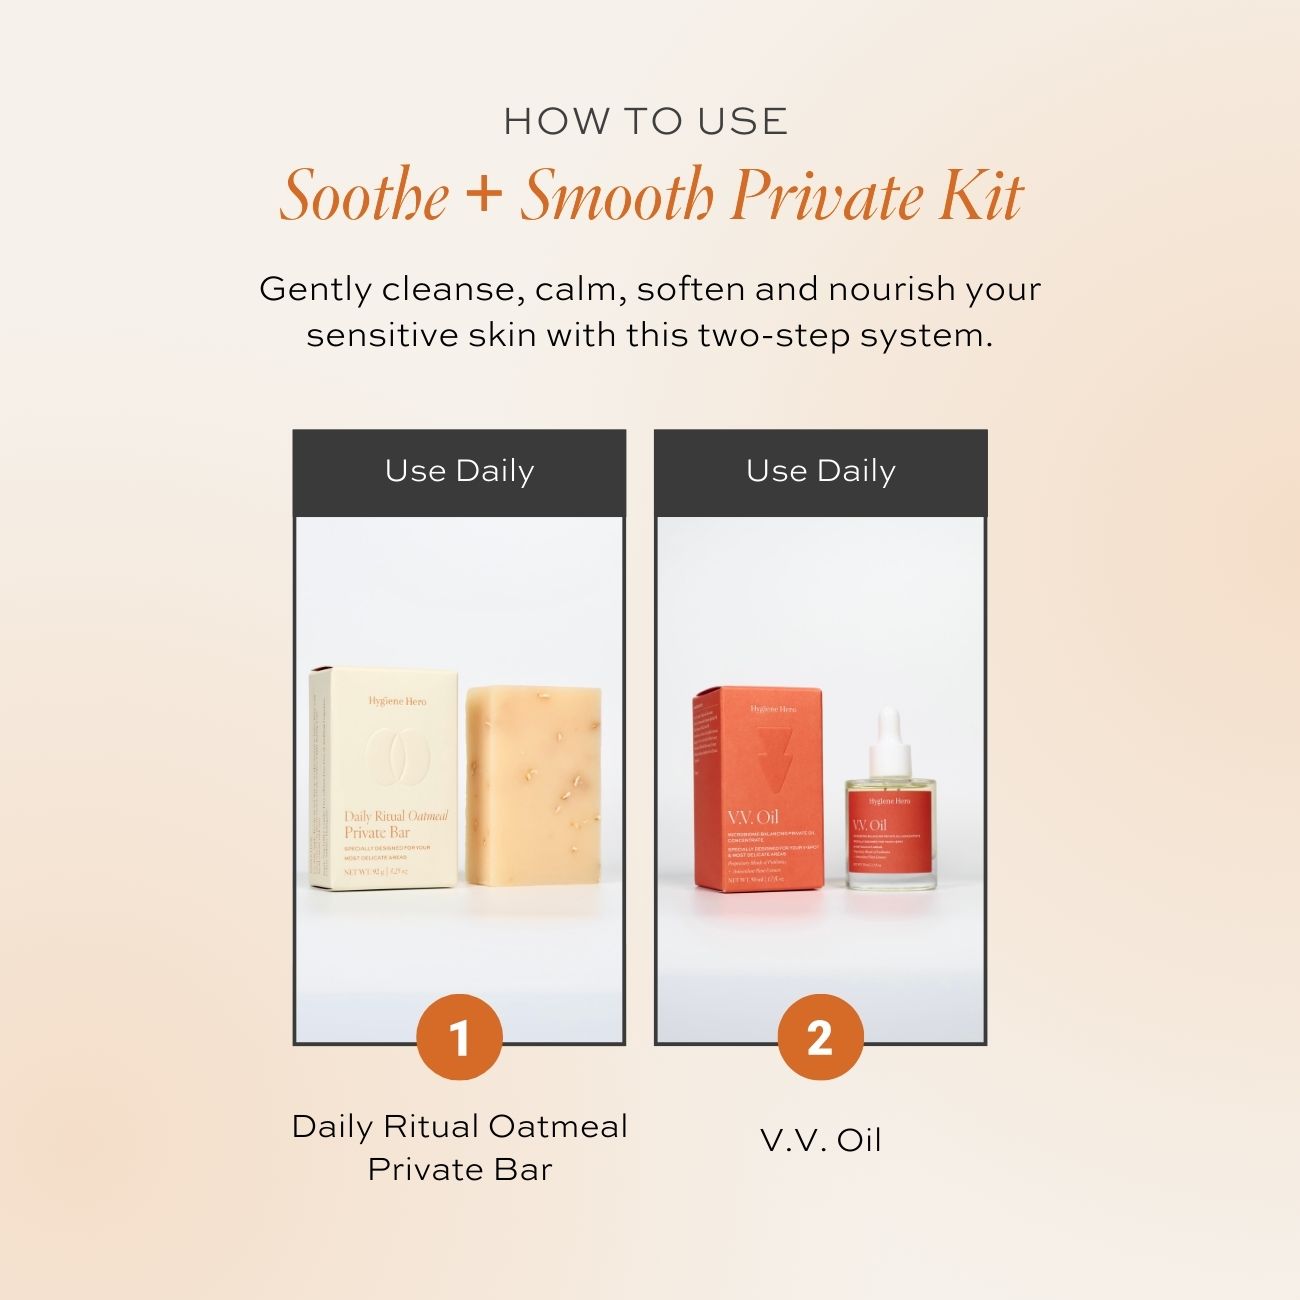 Soothe + Smooth Private Kit